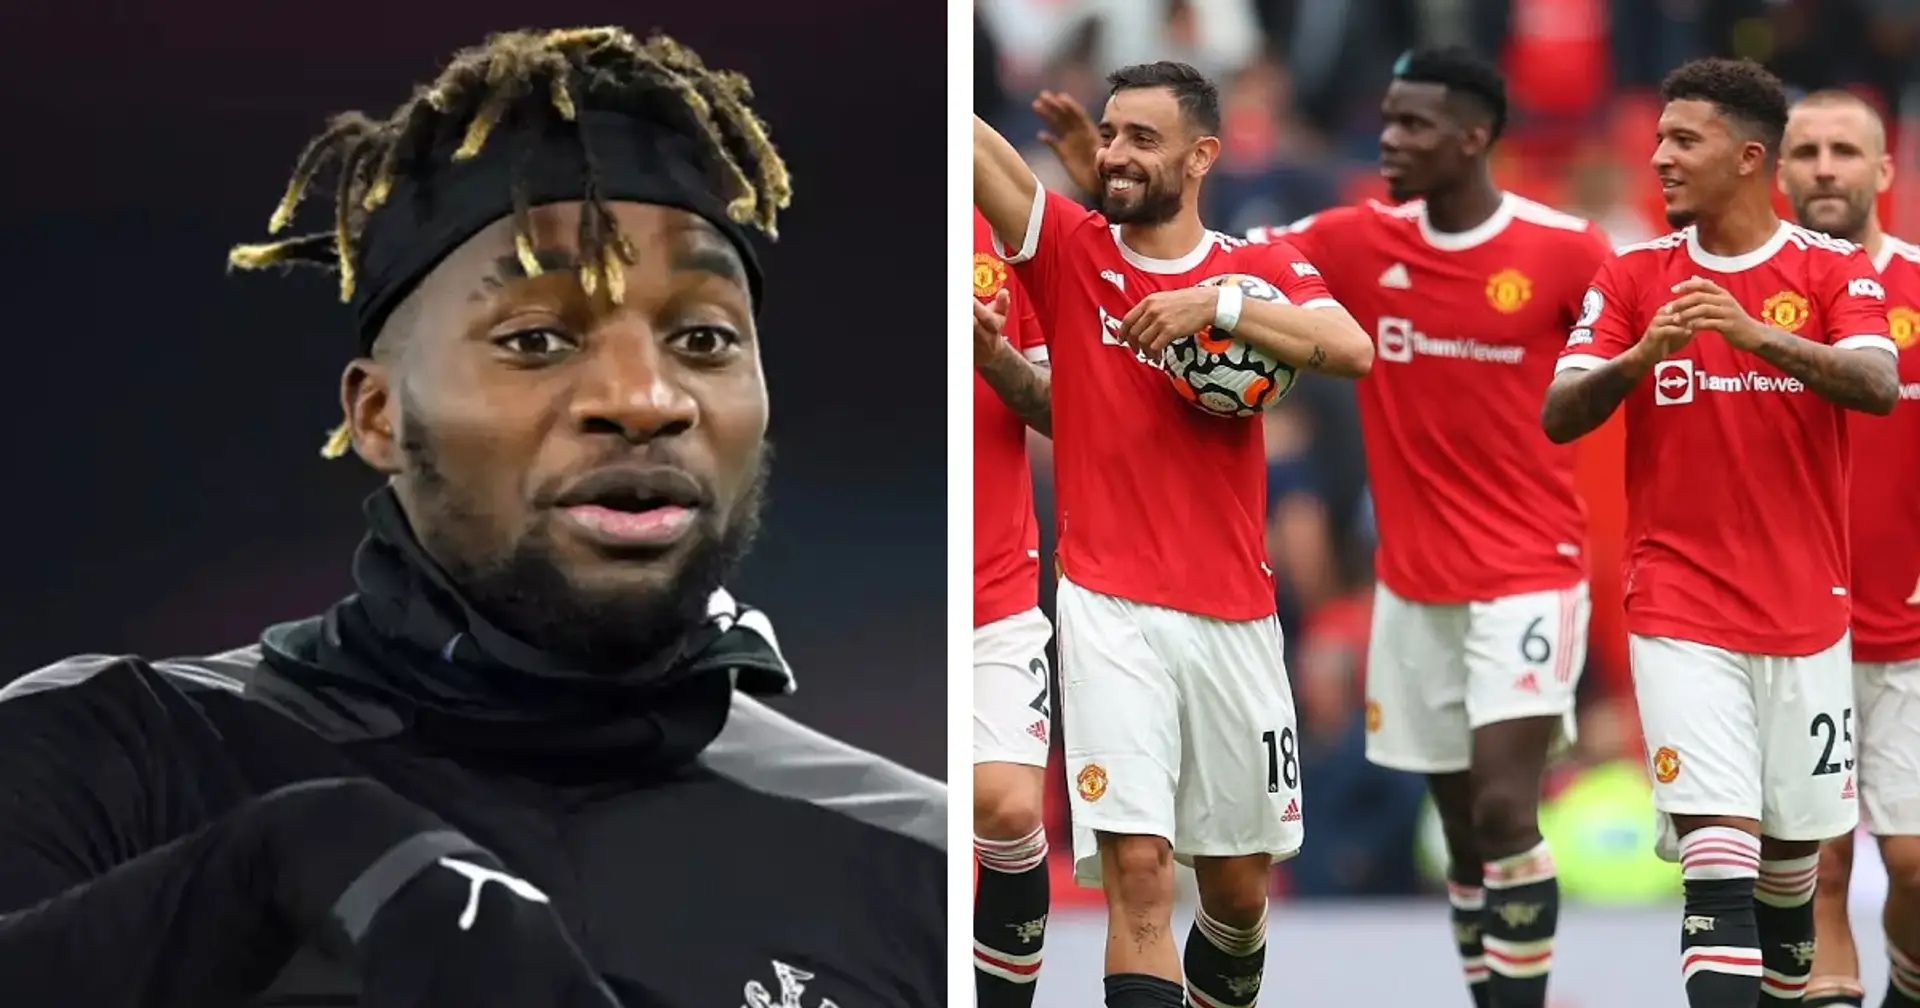 'Not like they're invincible': Newcastle's Allan Saint-Maximin reacts to facing Man United